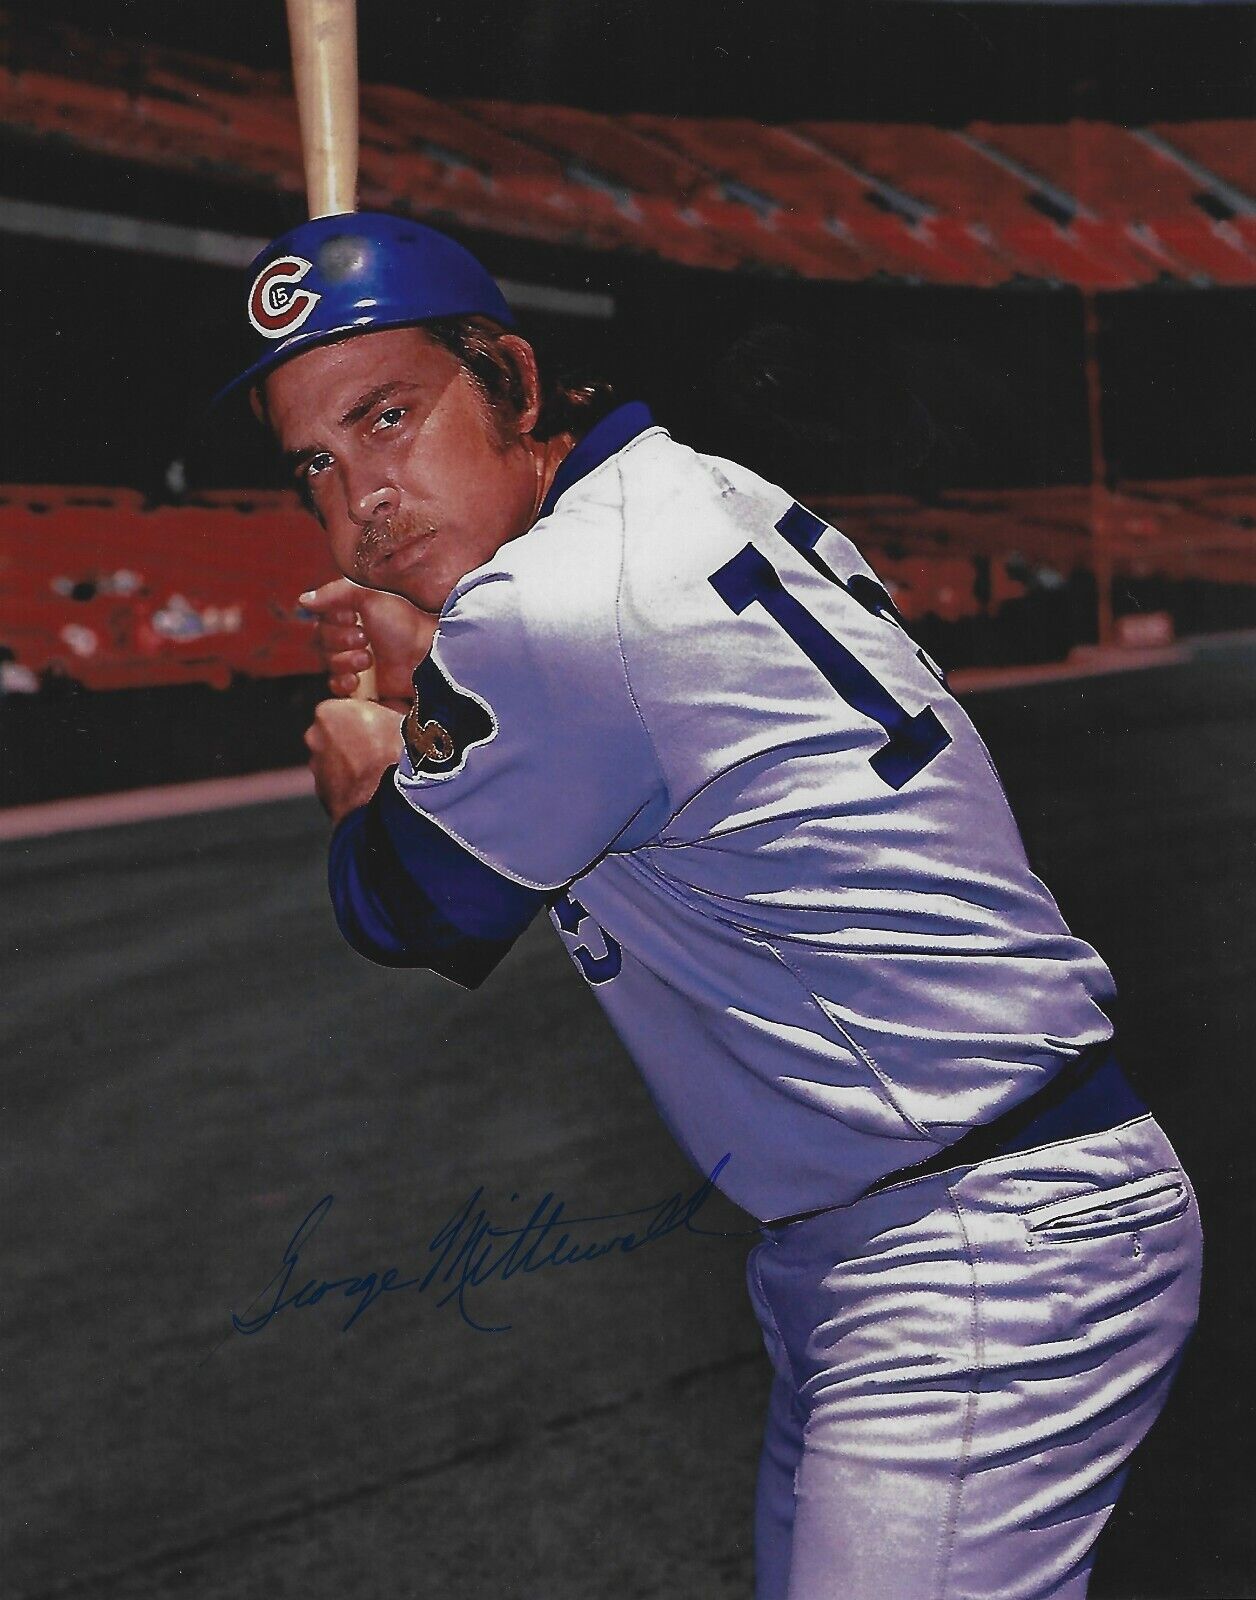 Signed 8x10 GEORGE MITTERWALD Chicago Cubs Autographed Photo Poster painting - COA